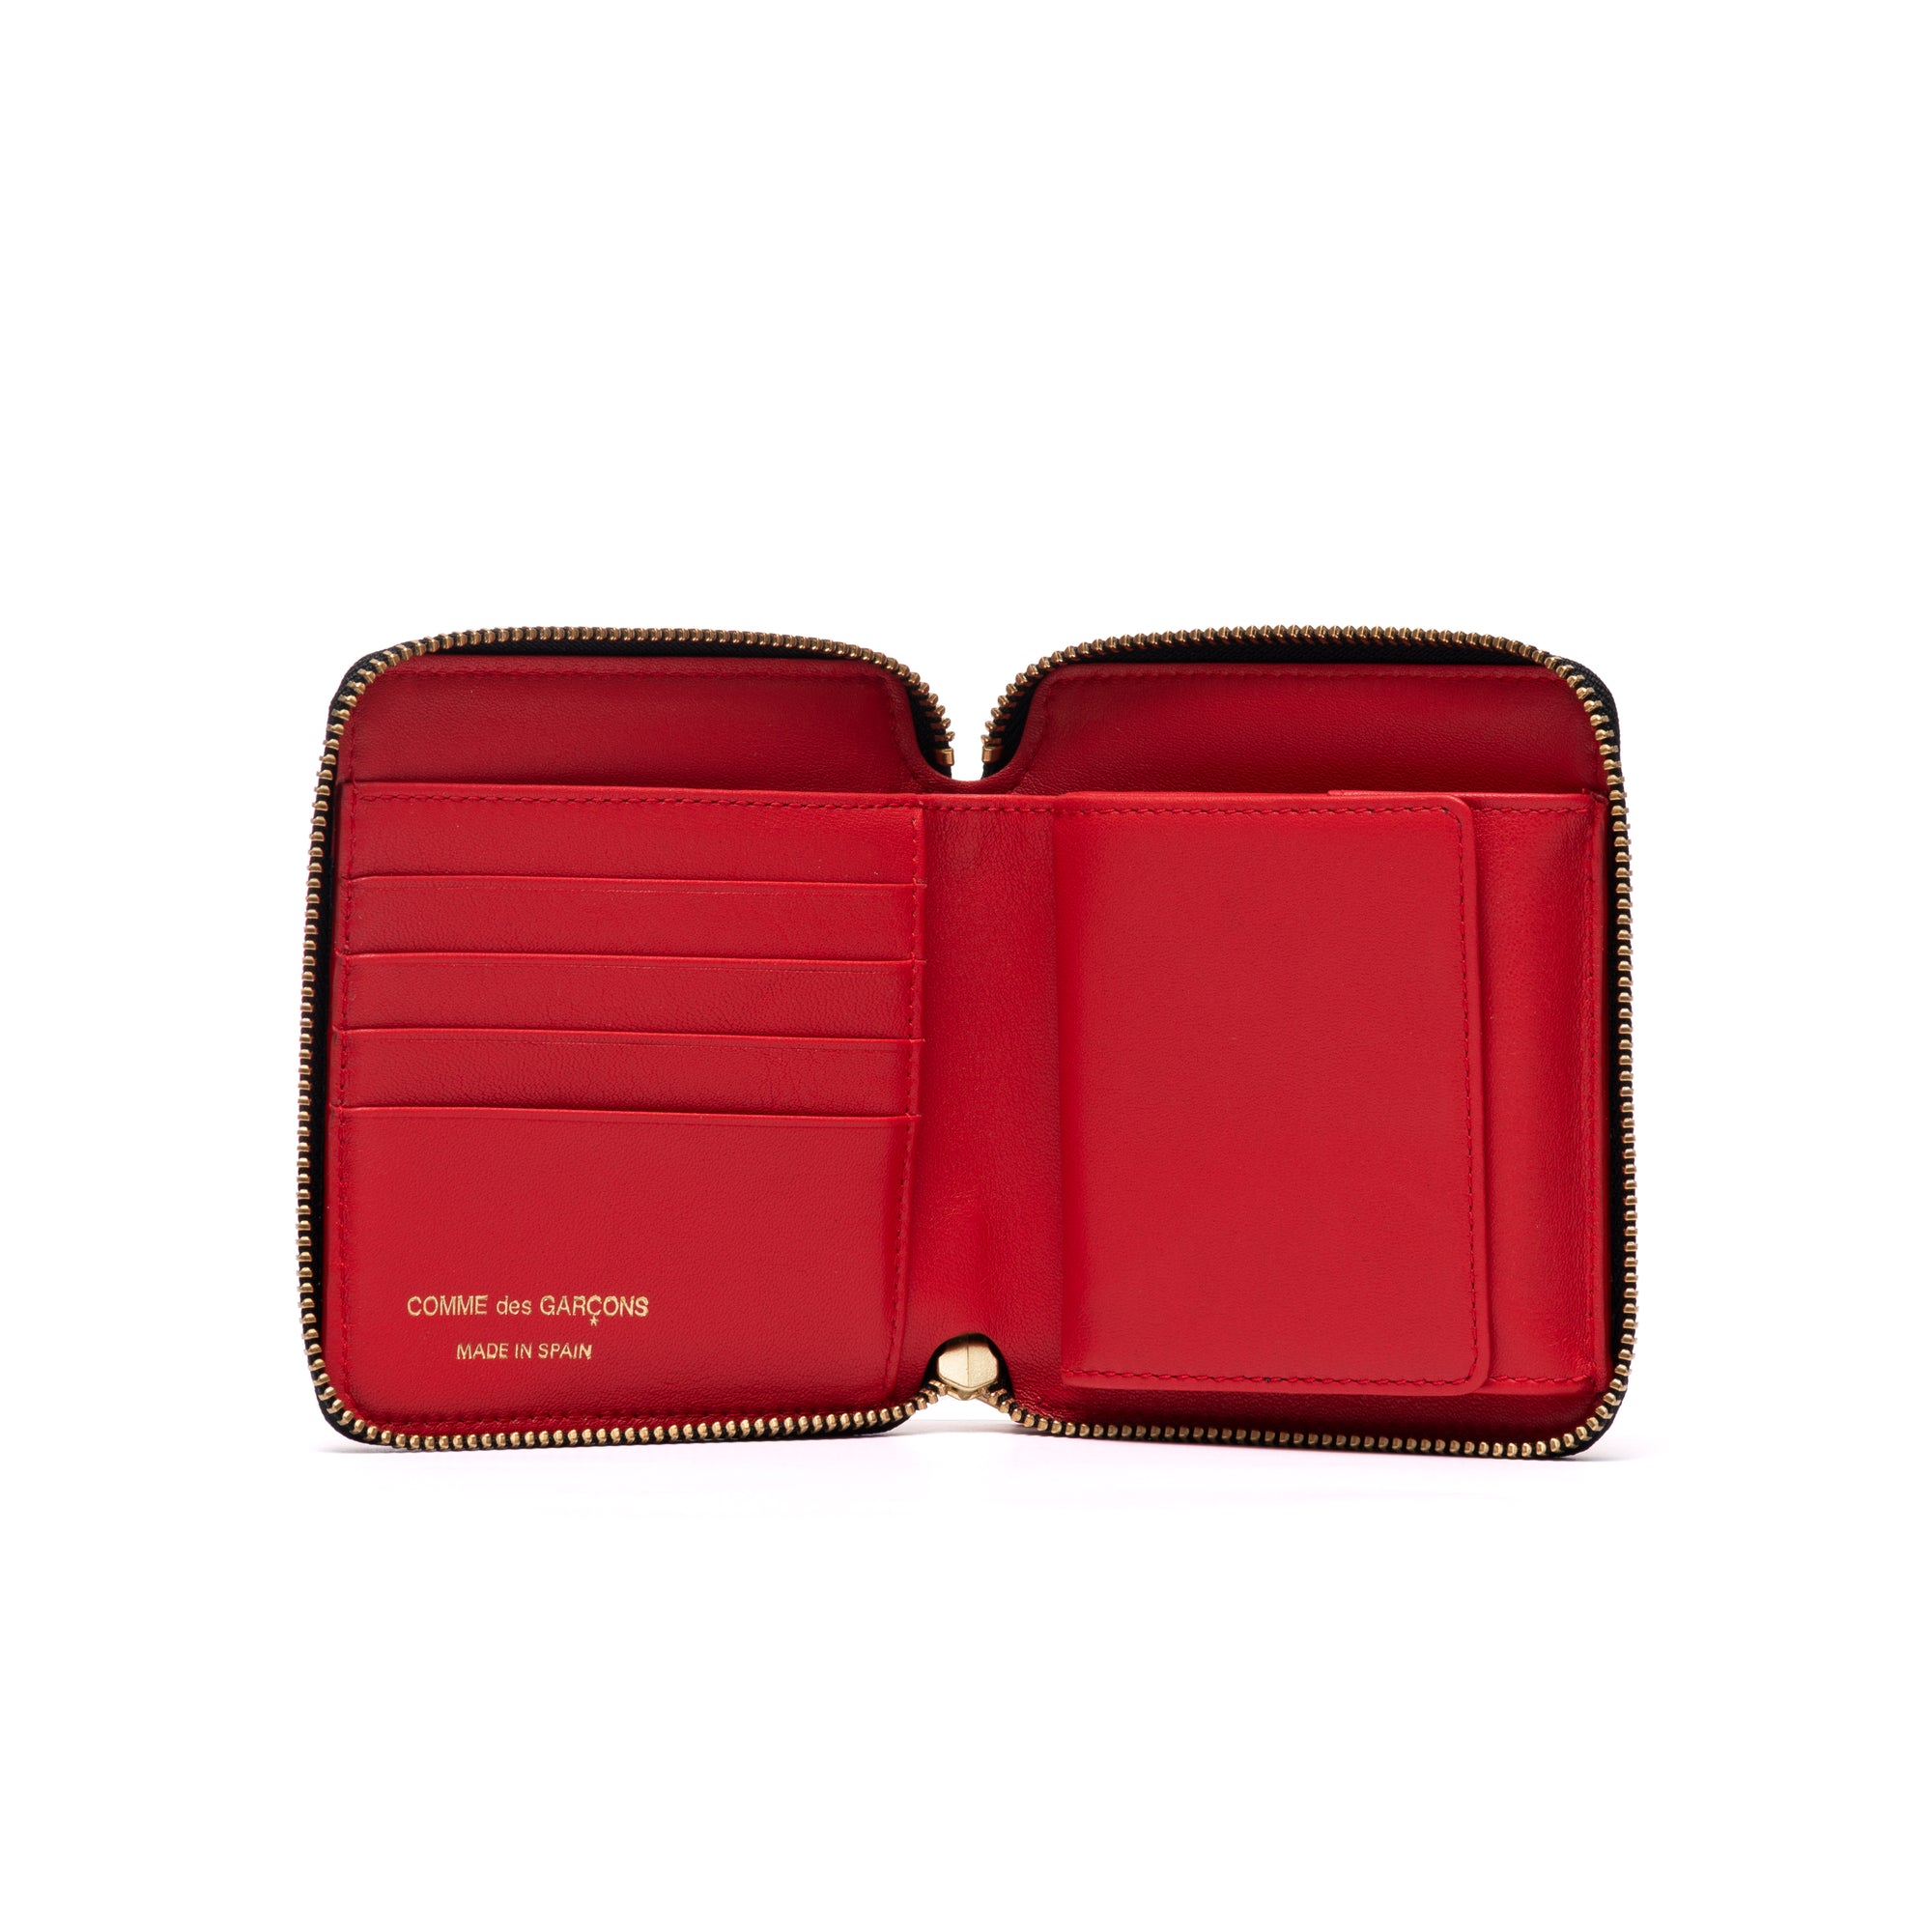 CDG WALLET - Embossed Roots - (SA2100ER Red) view 3